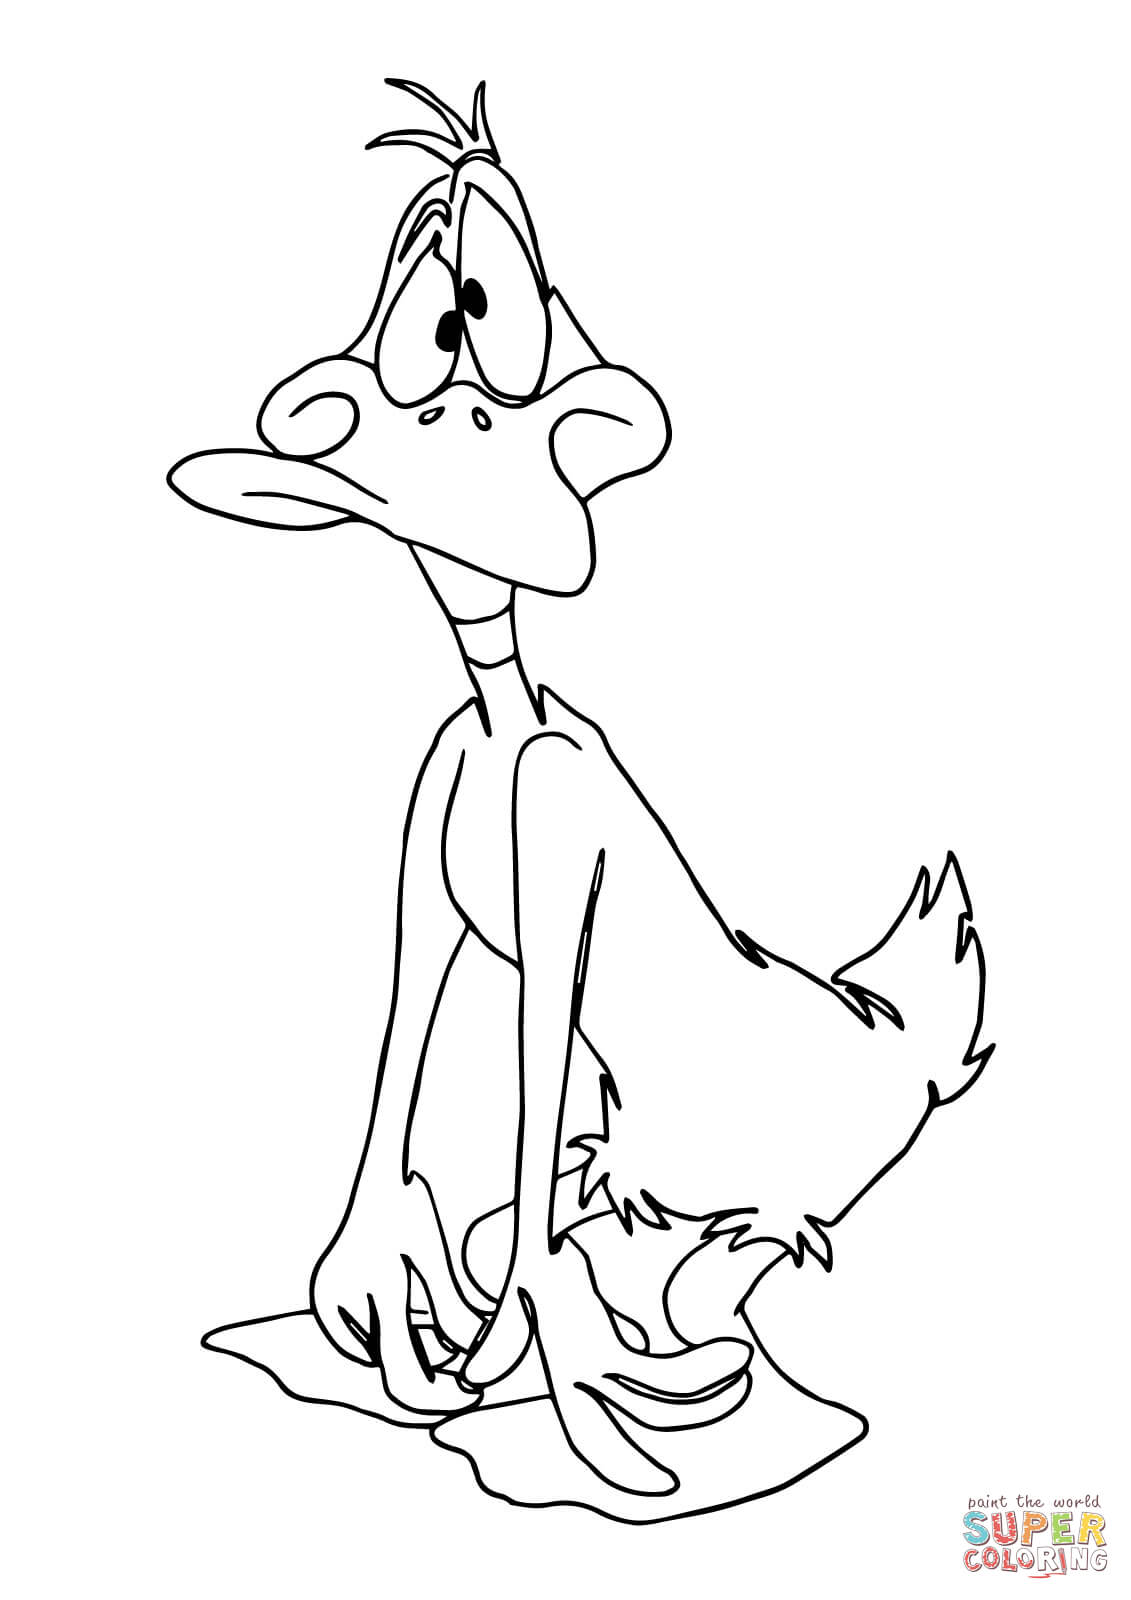 Daffy duck is confused coloring page free printable coloring pages